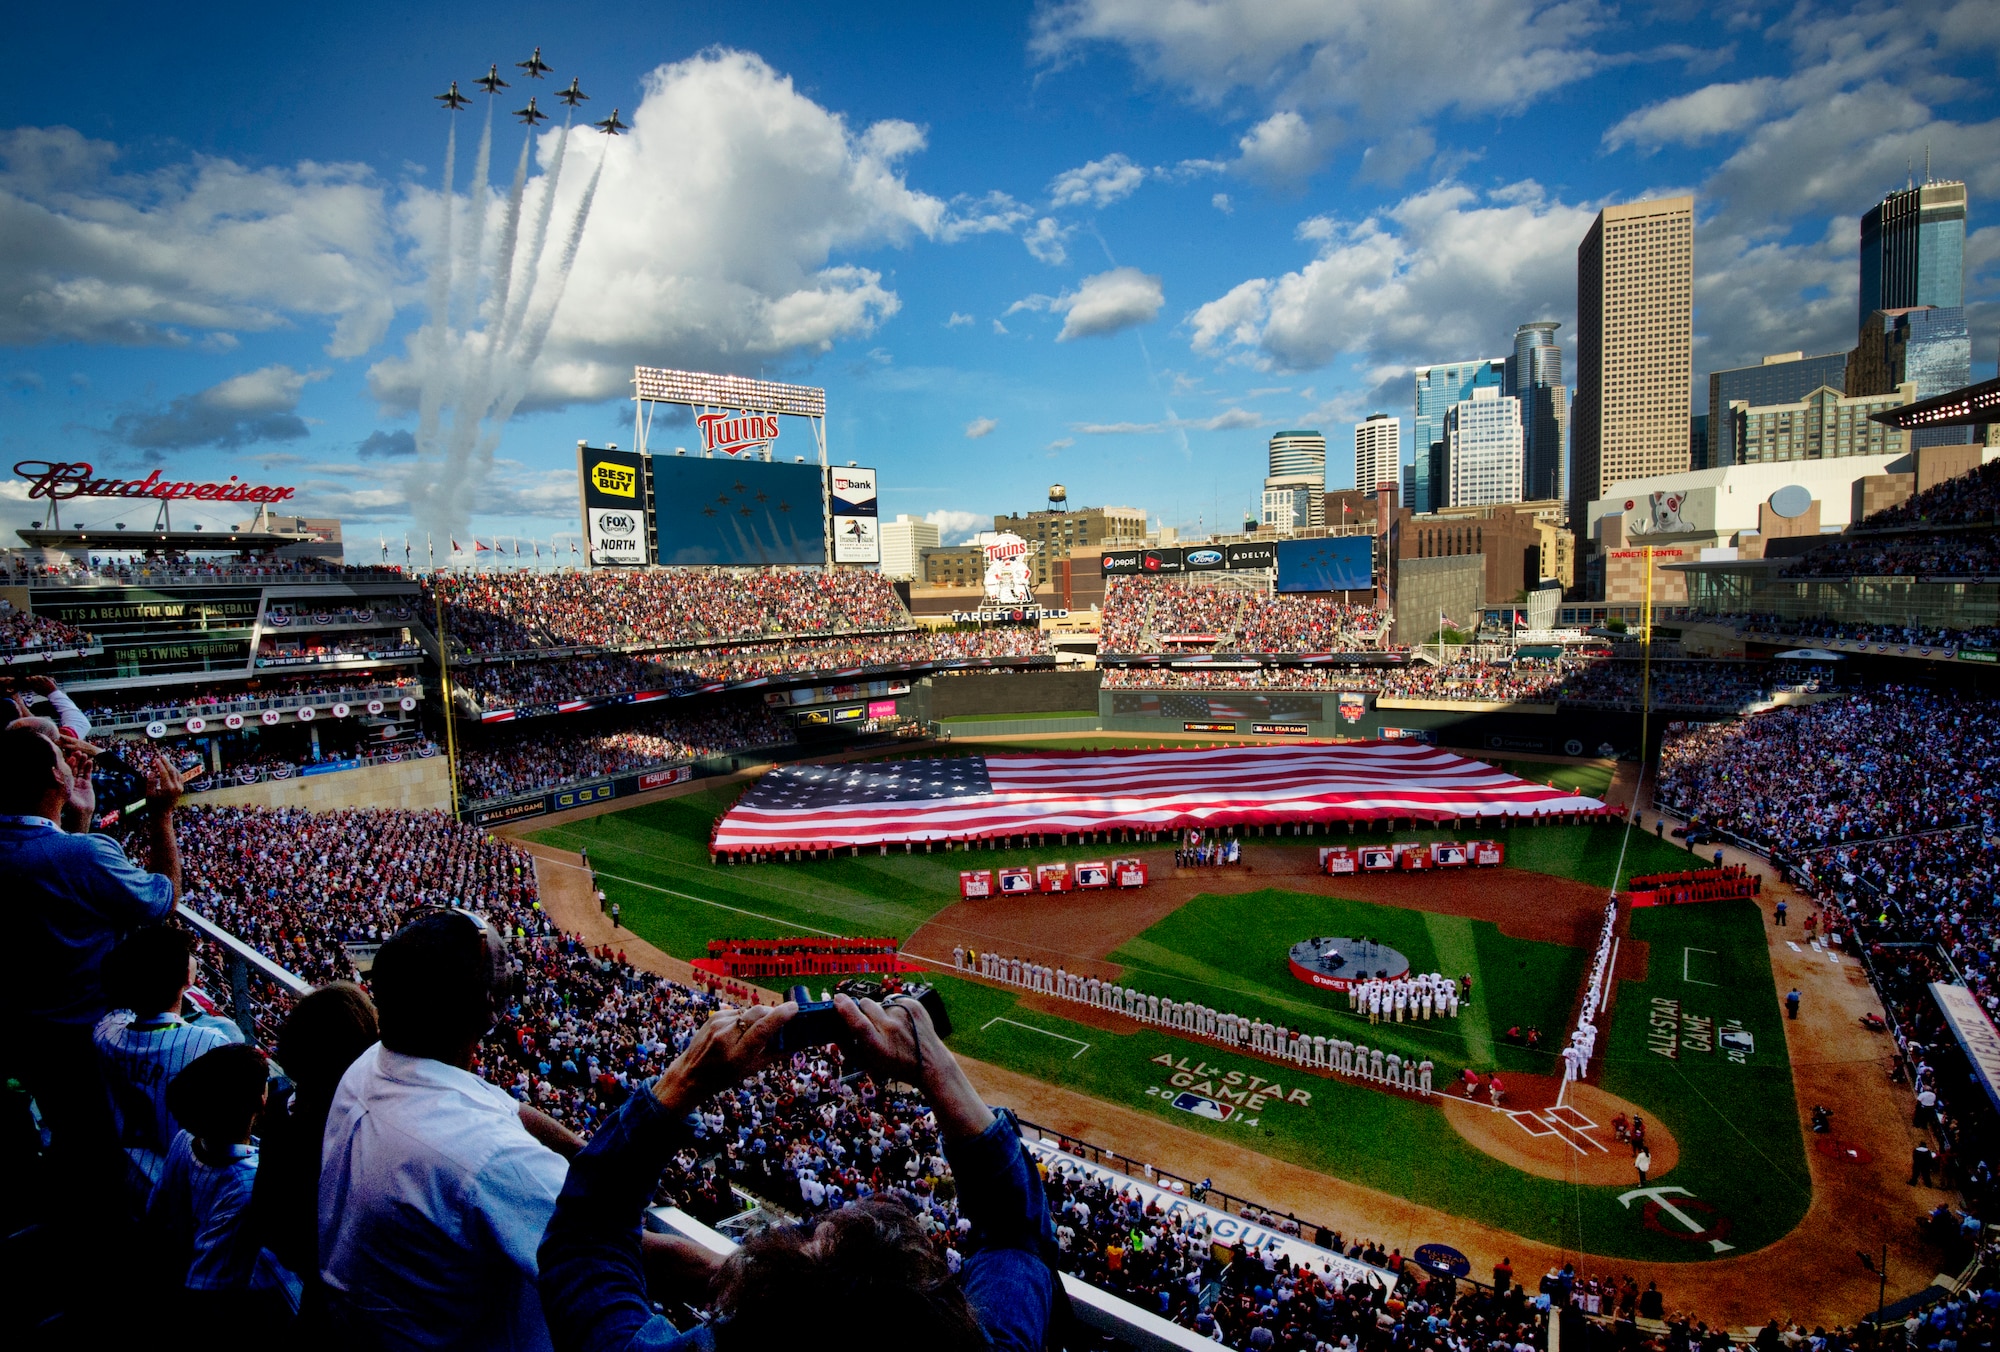 The Thunderbirds perform a flyover during the national anthem at the Major League Baseball’s All-Star Game July 15, 2014, in Minneapolis, Minn. The Thunderbirds are the Air Force’s precision flying demonstration team that flies red, white and blue F-16 Fighting Falcons (U.S. Air Force photo/Master Sgt. Stan Parker)